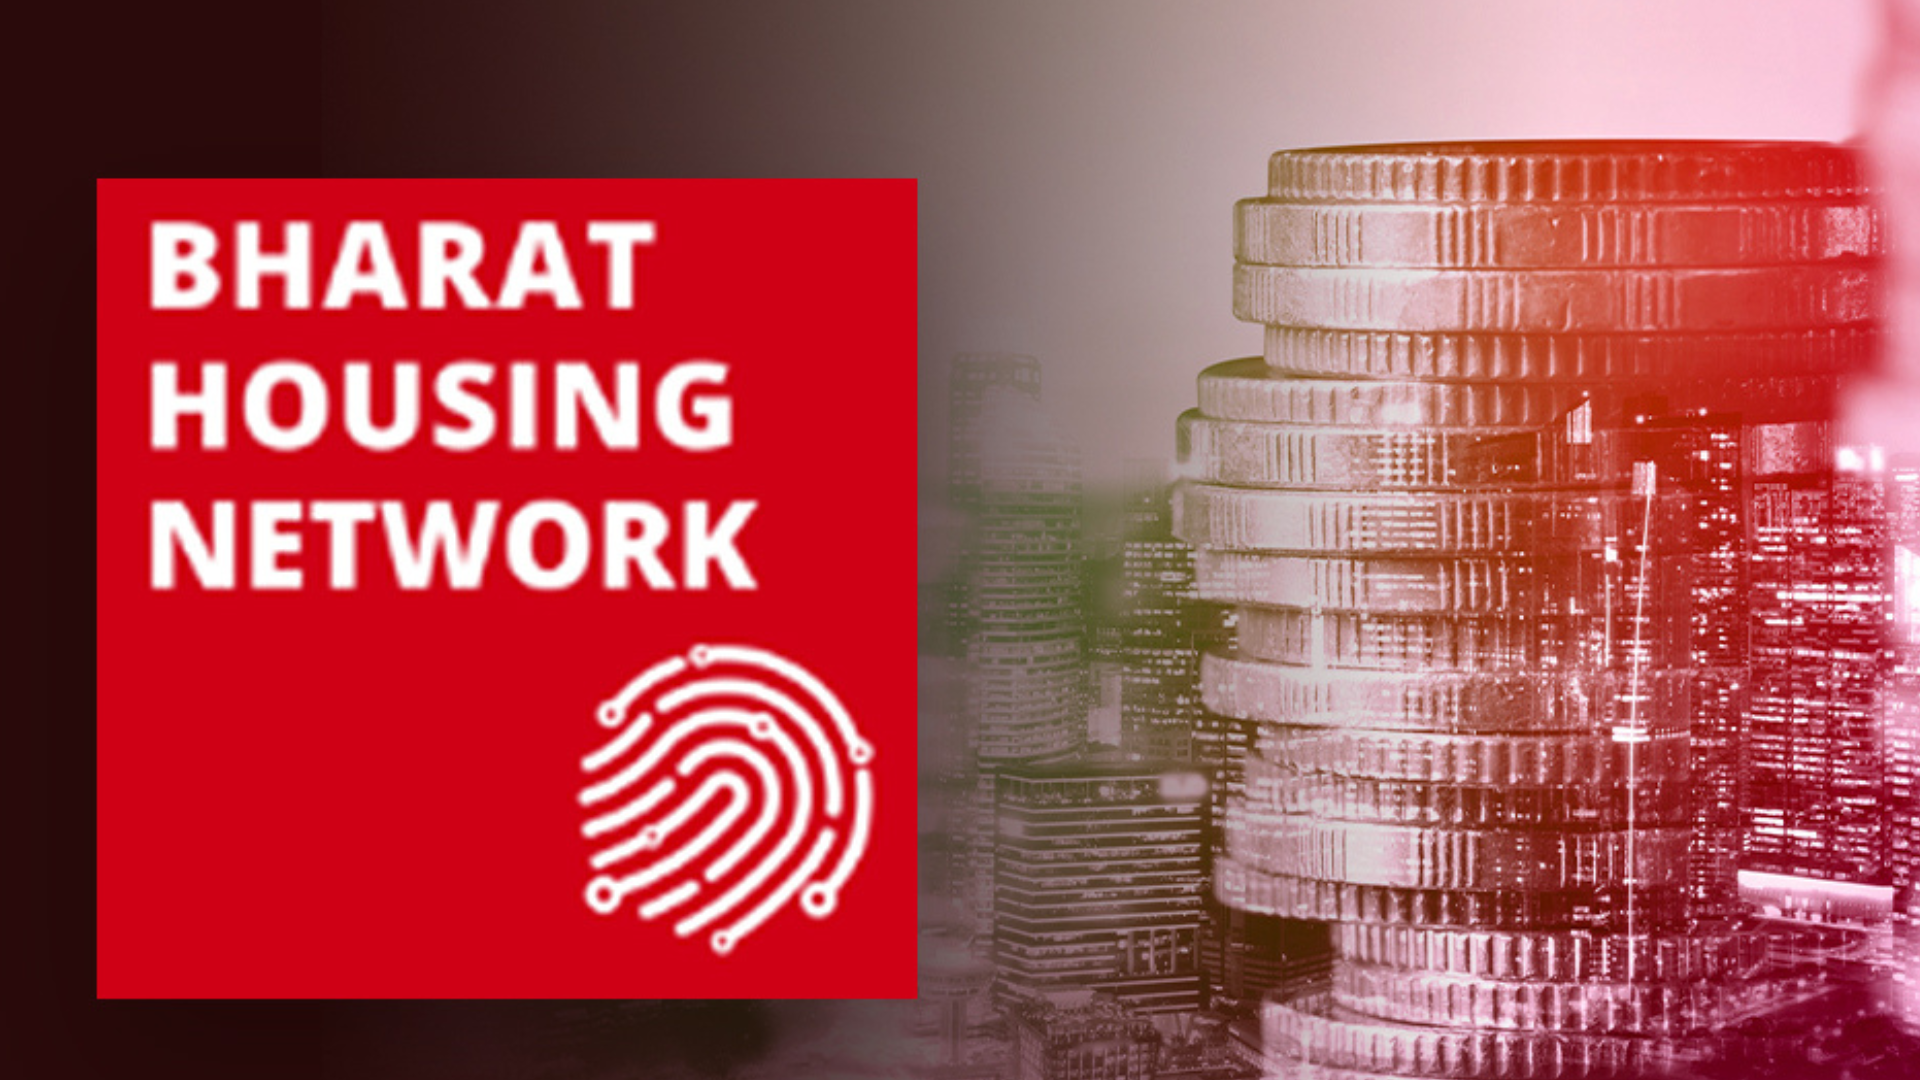 Equity 360 facilitates Bharat Housing Network with 125 Crores in Series For Reshaping the Rural India Housing